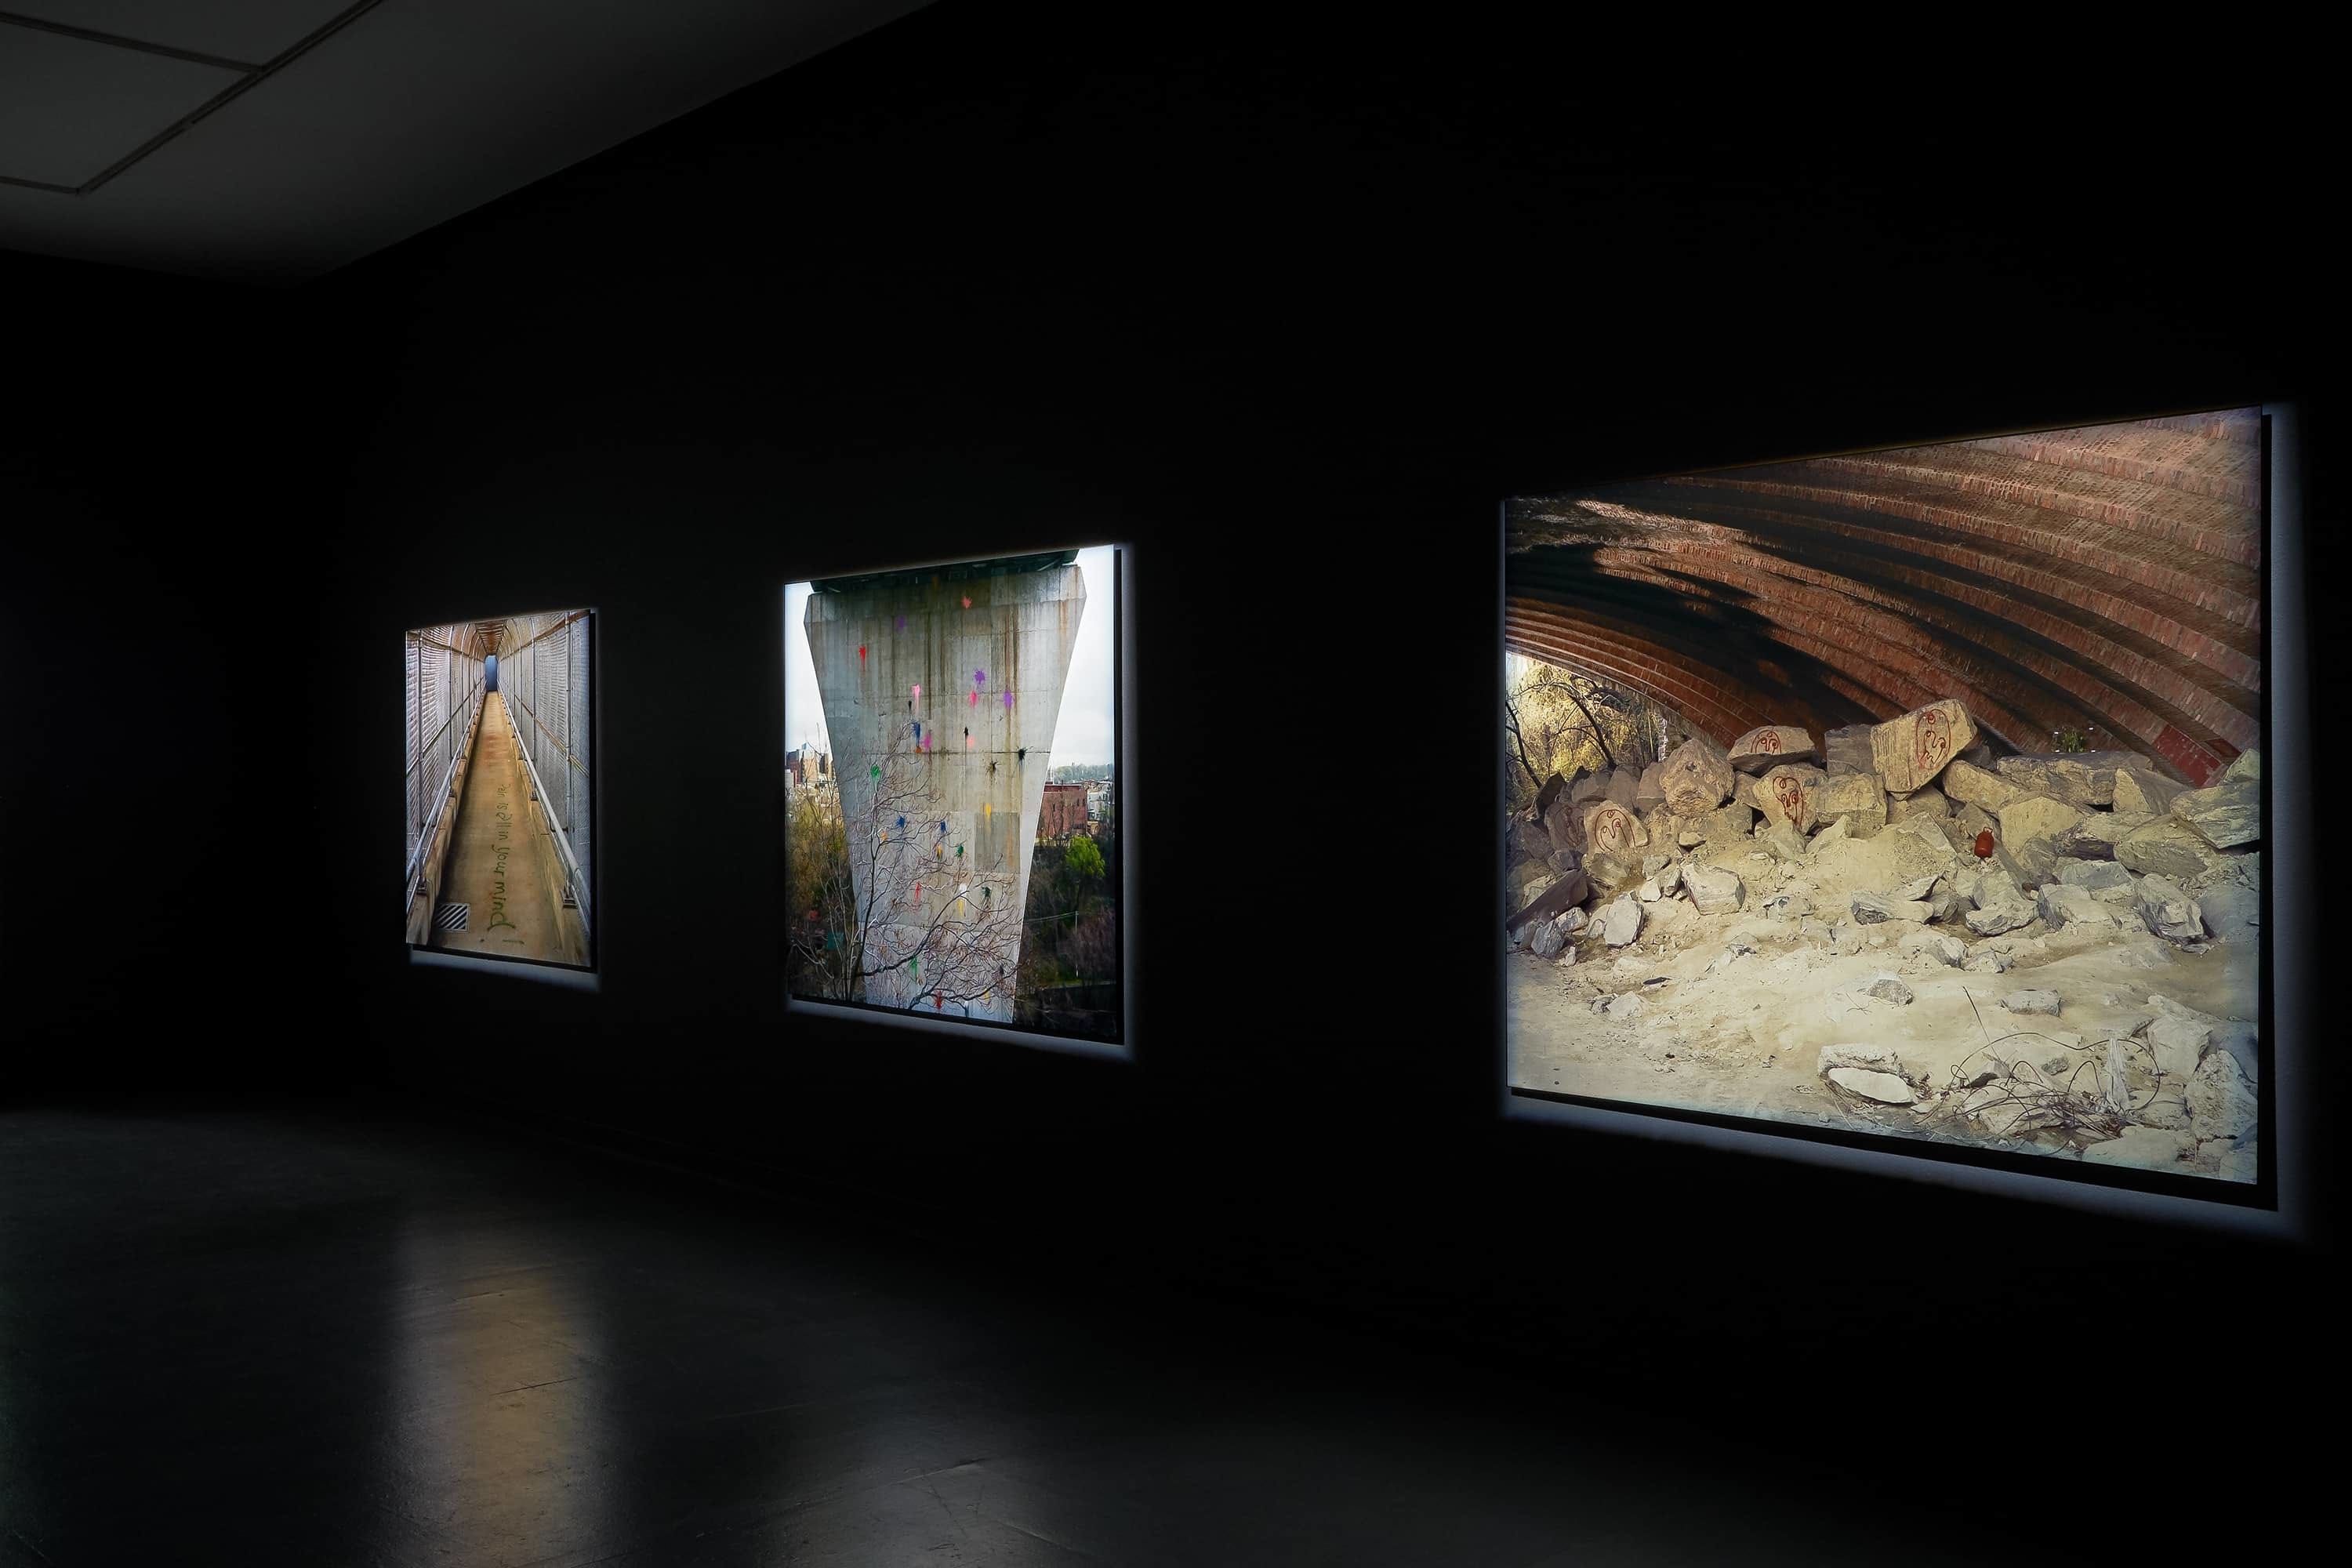 Three large photographs of grafitti on infrastructure illuminated in a dark gallery, detail.